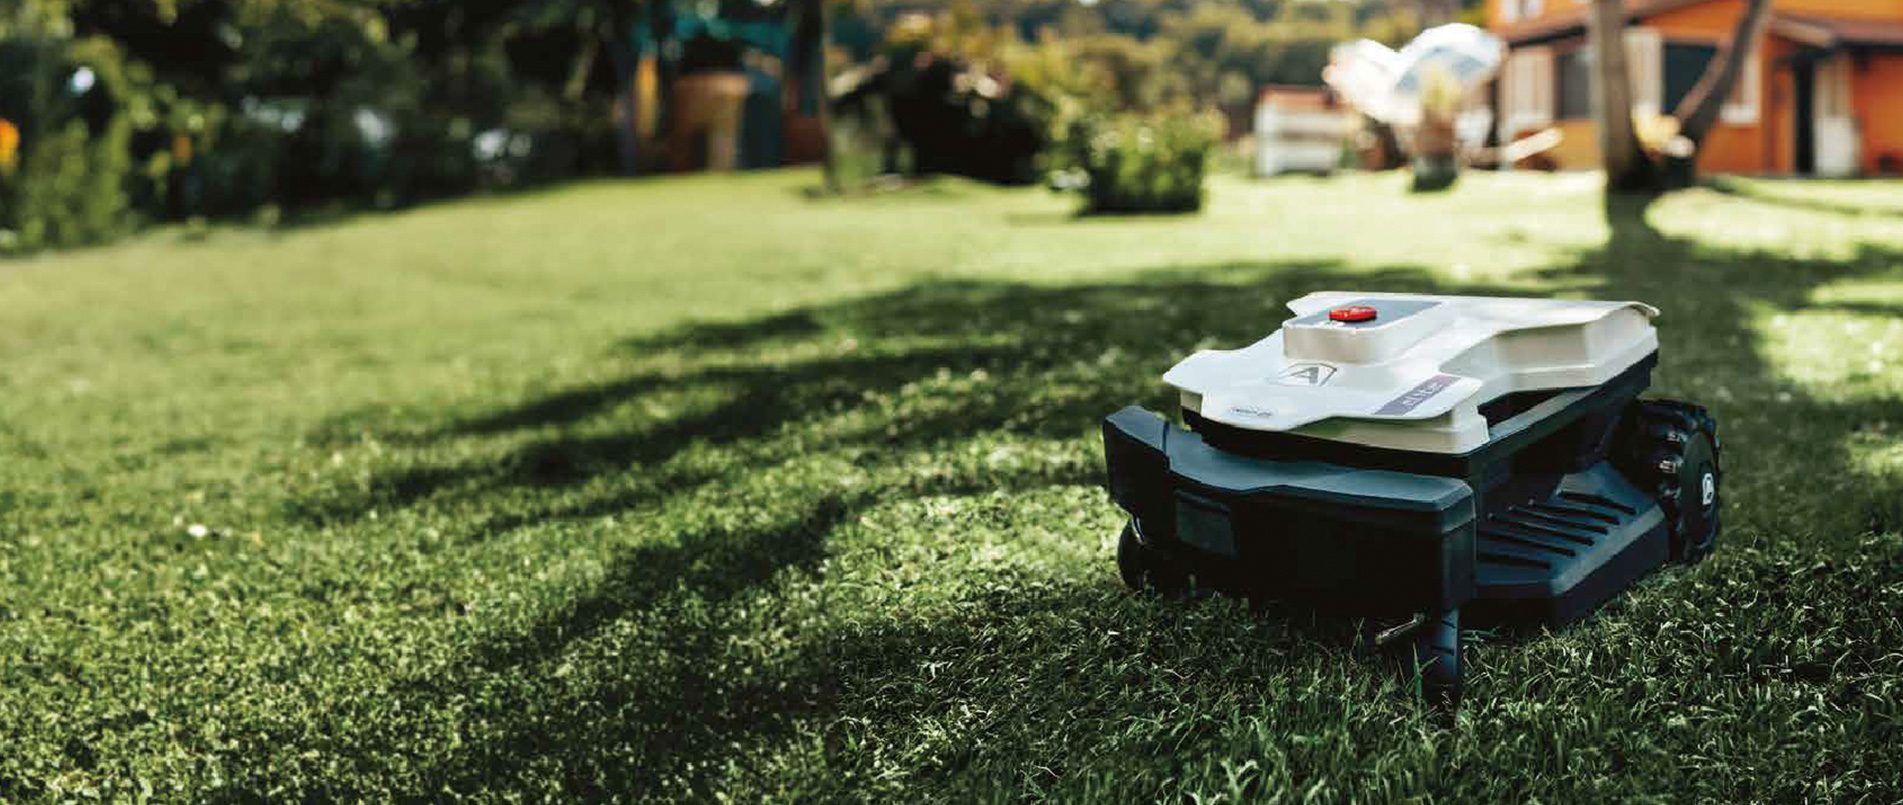 robotic lawnmower using rtk / high-precision gnss for industrial applications